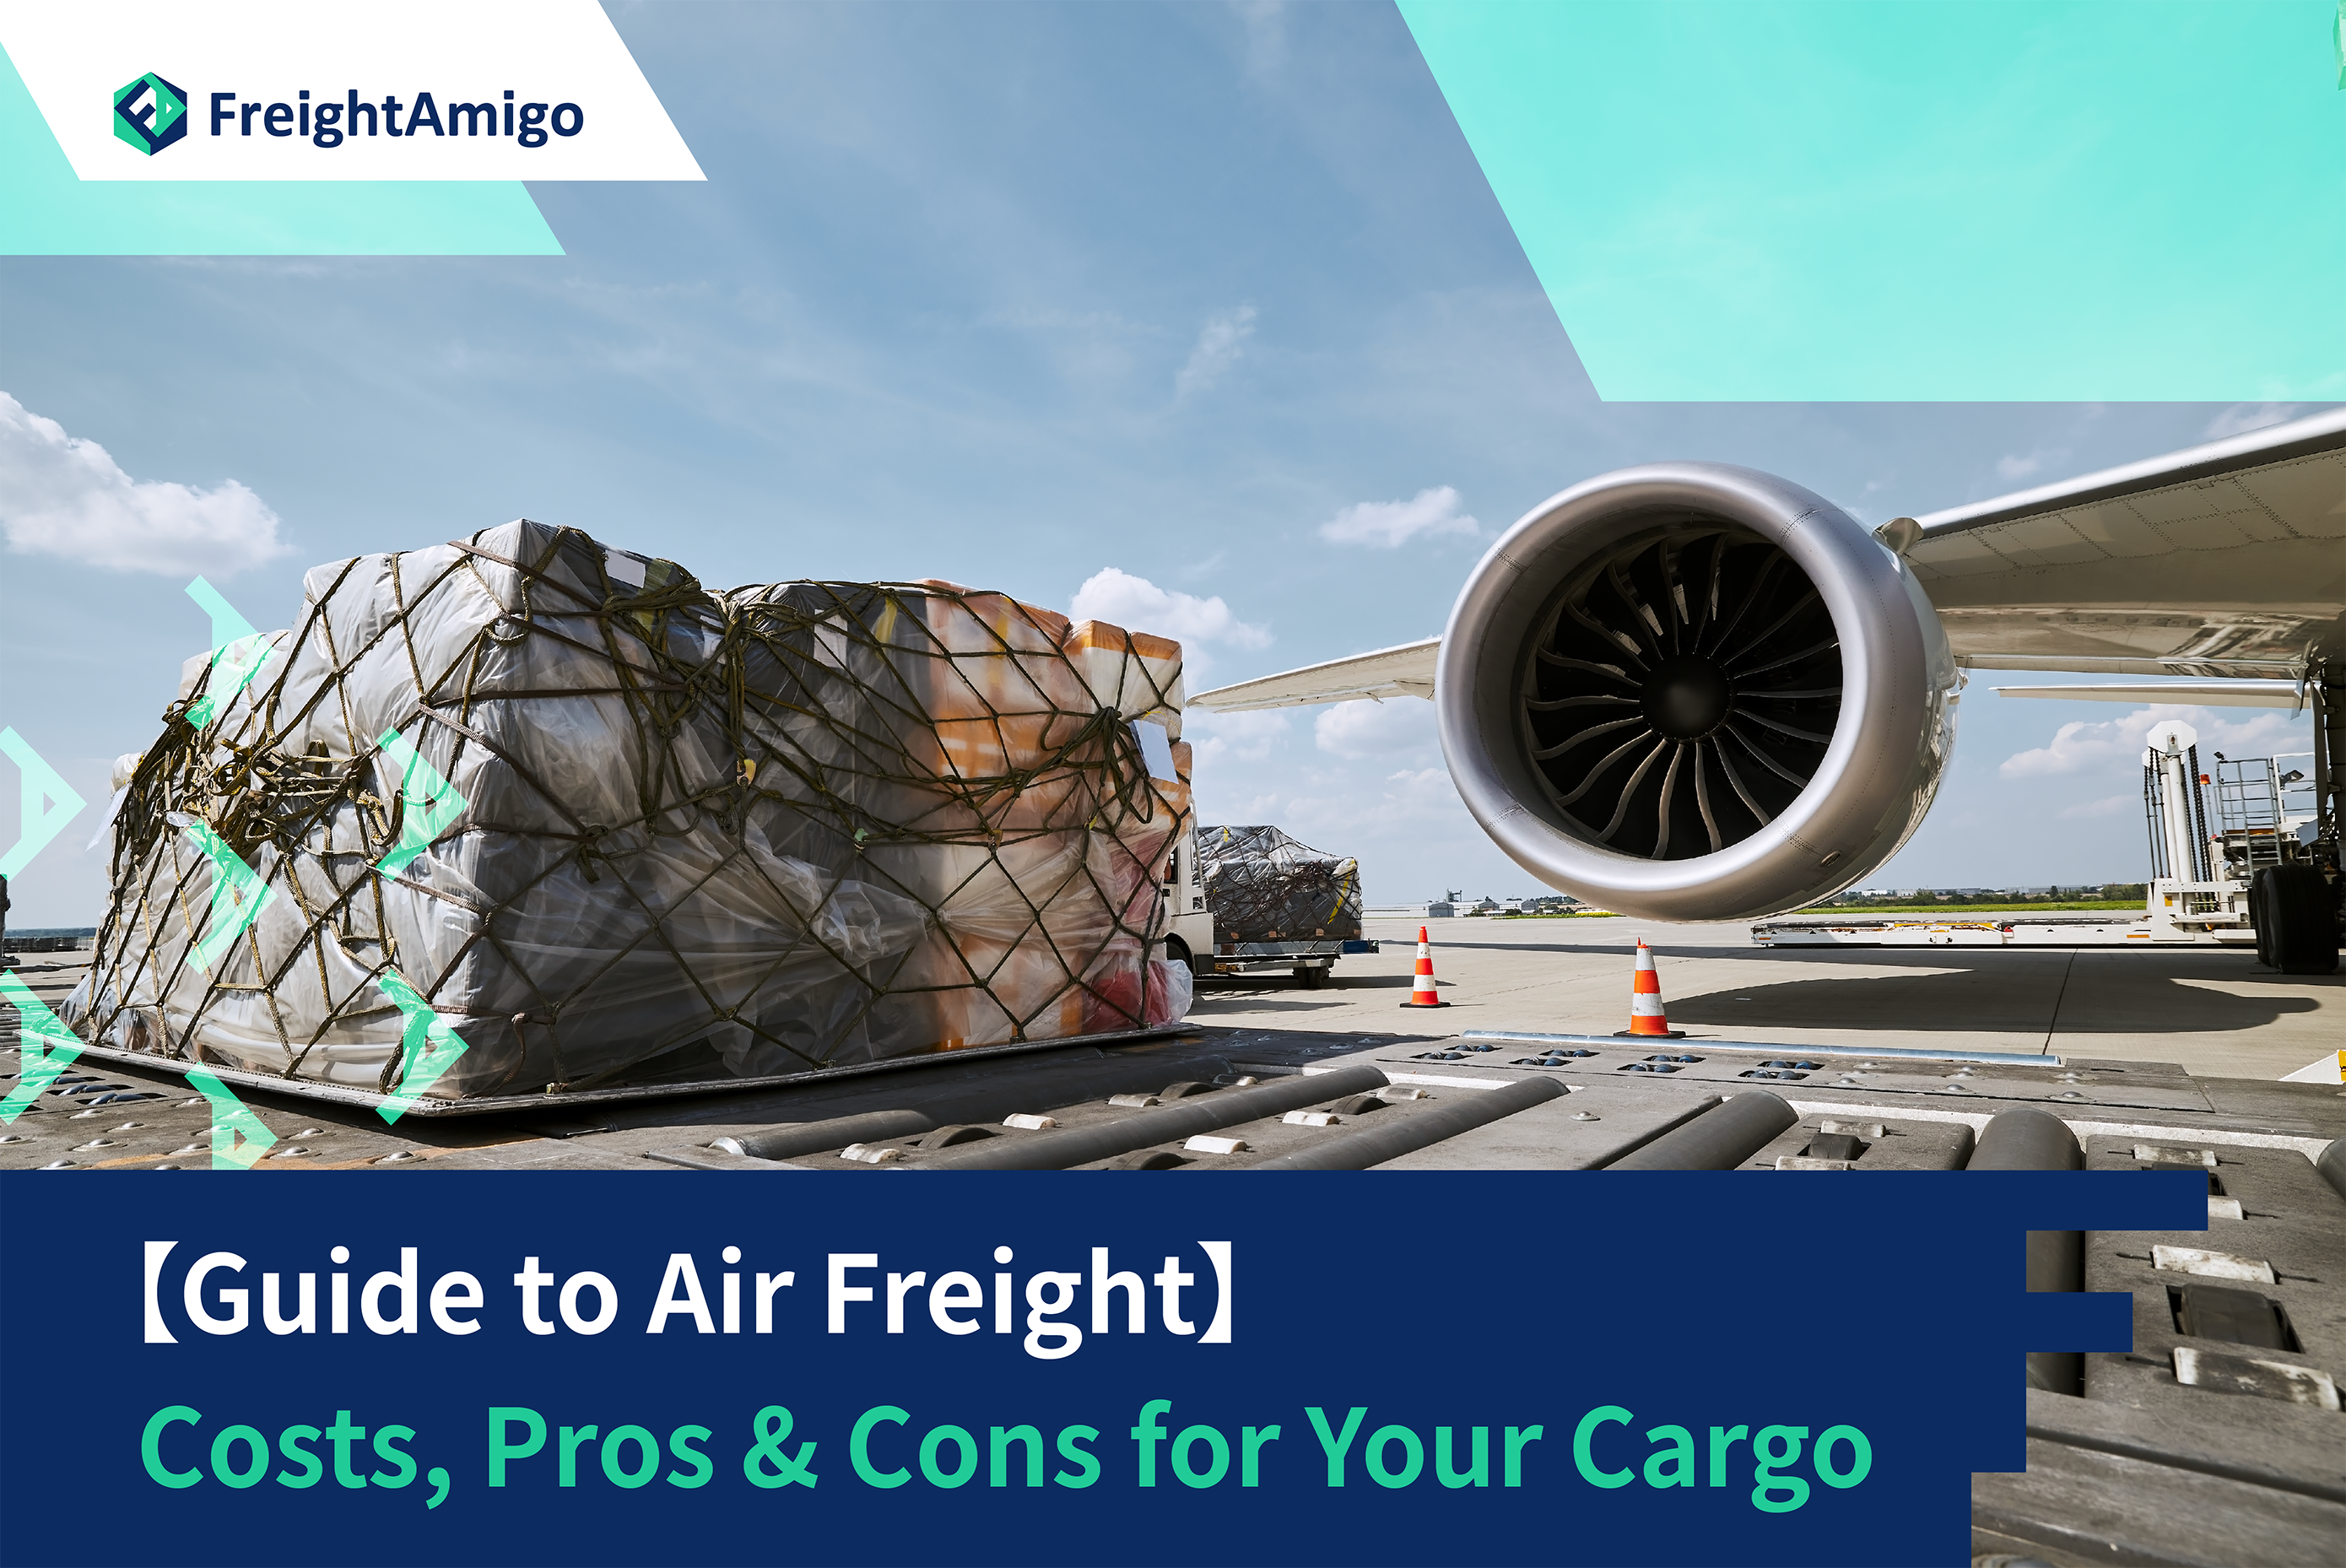 【Guide to Air Freight】Costs, Pros & Cons for Your Cargo